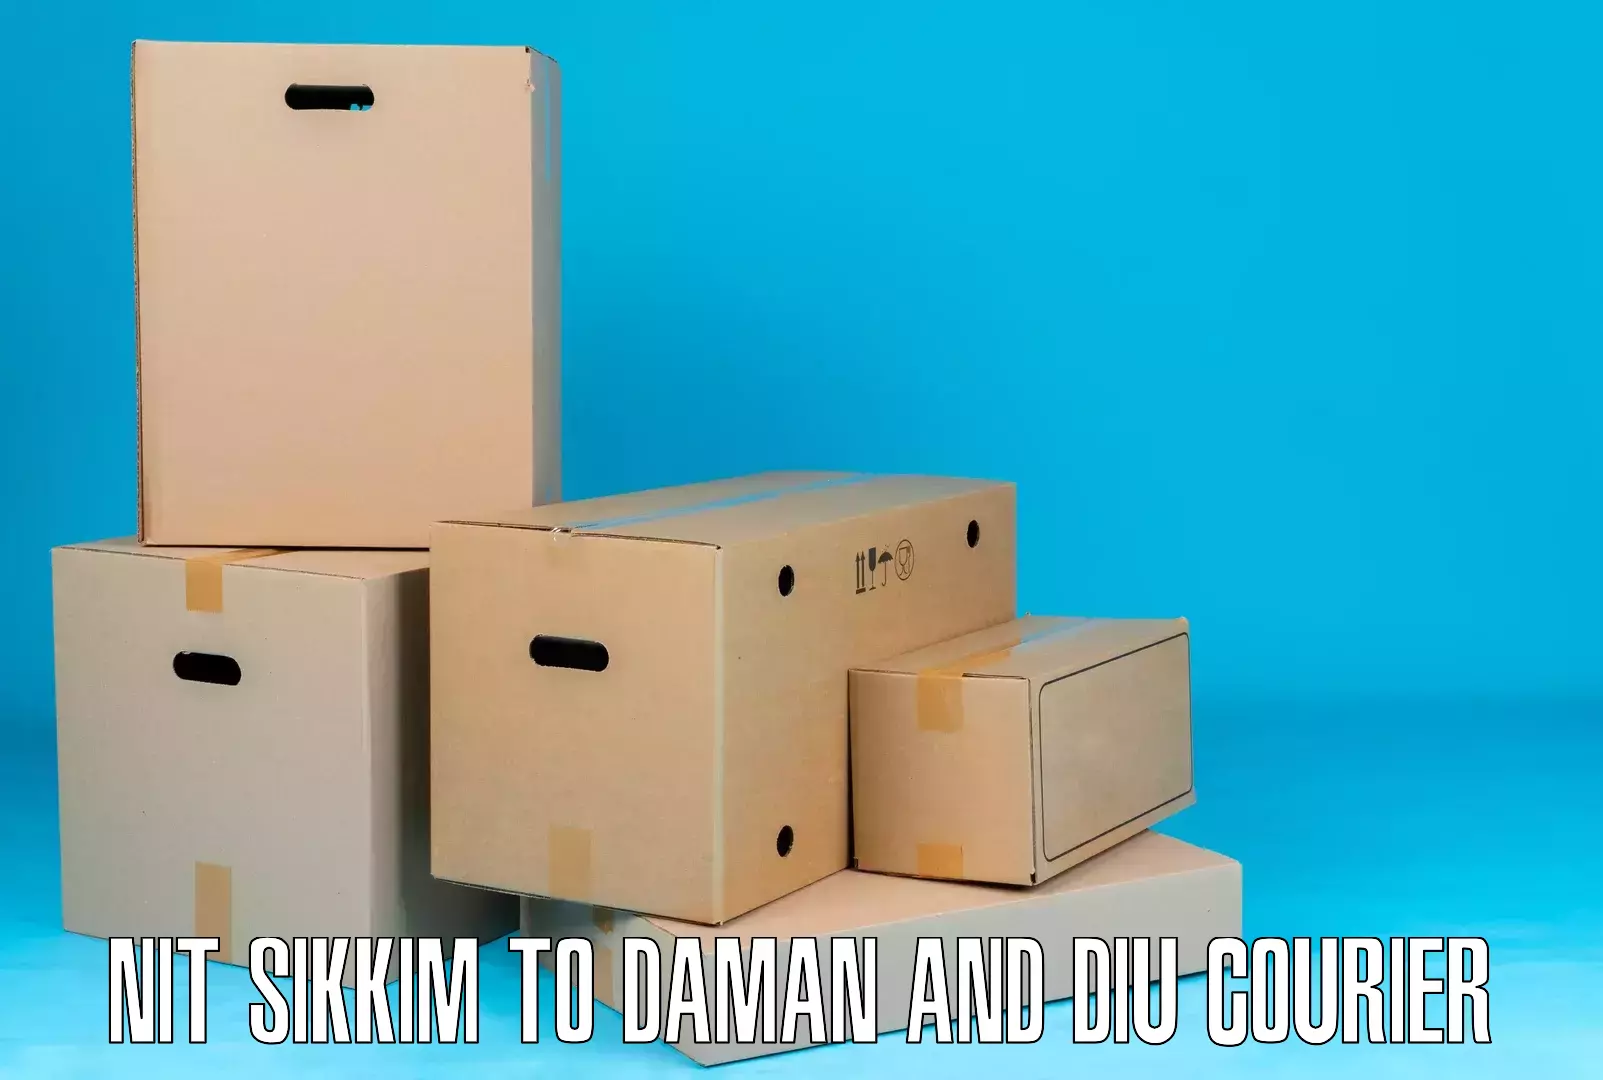 Easy access courier services NIT Sikkim to Daman and Diu